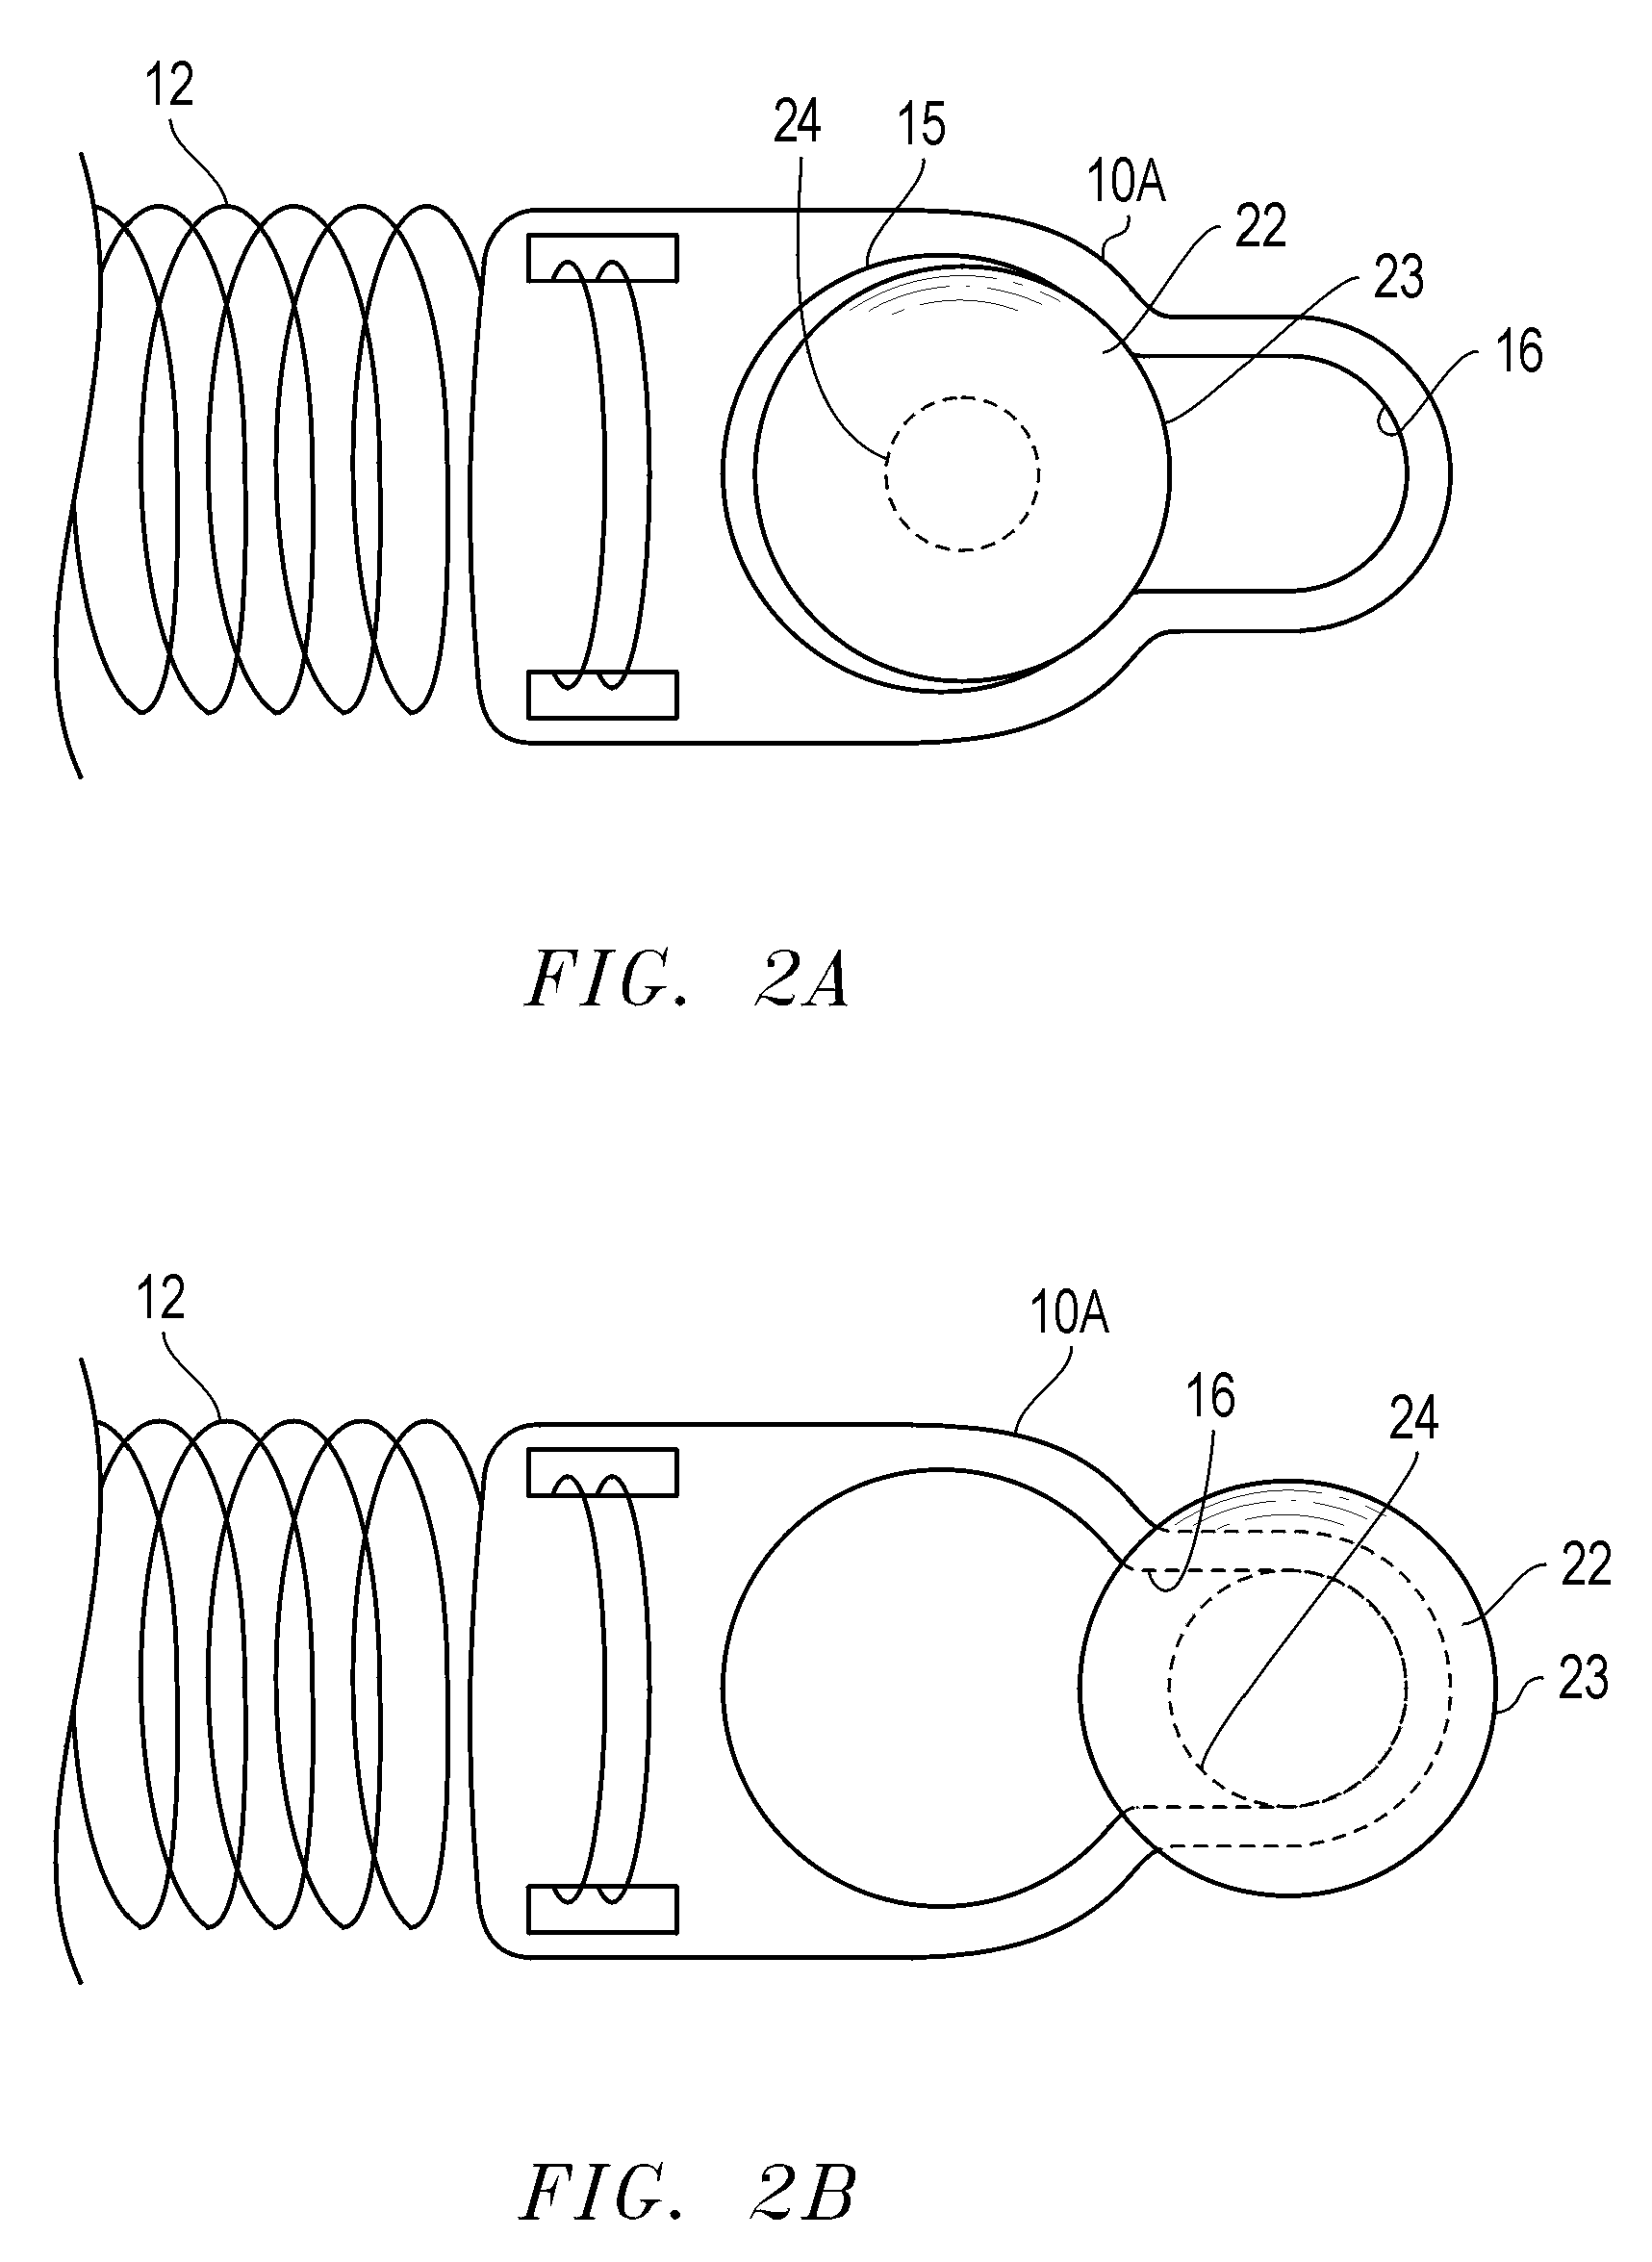 Orthodontic closed coil spring assembly and method of use thereof